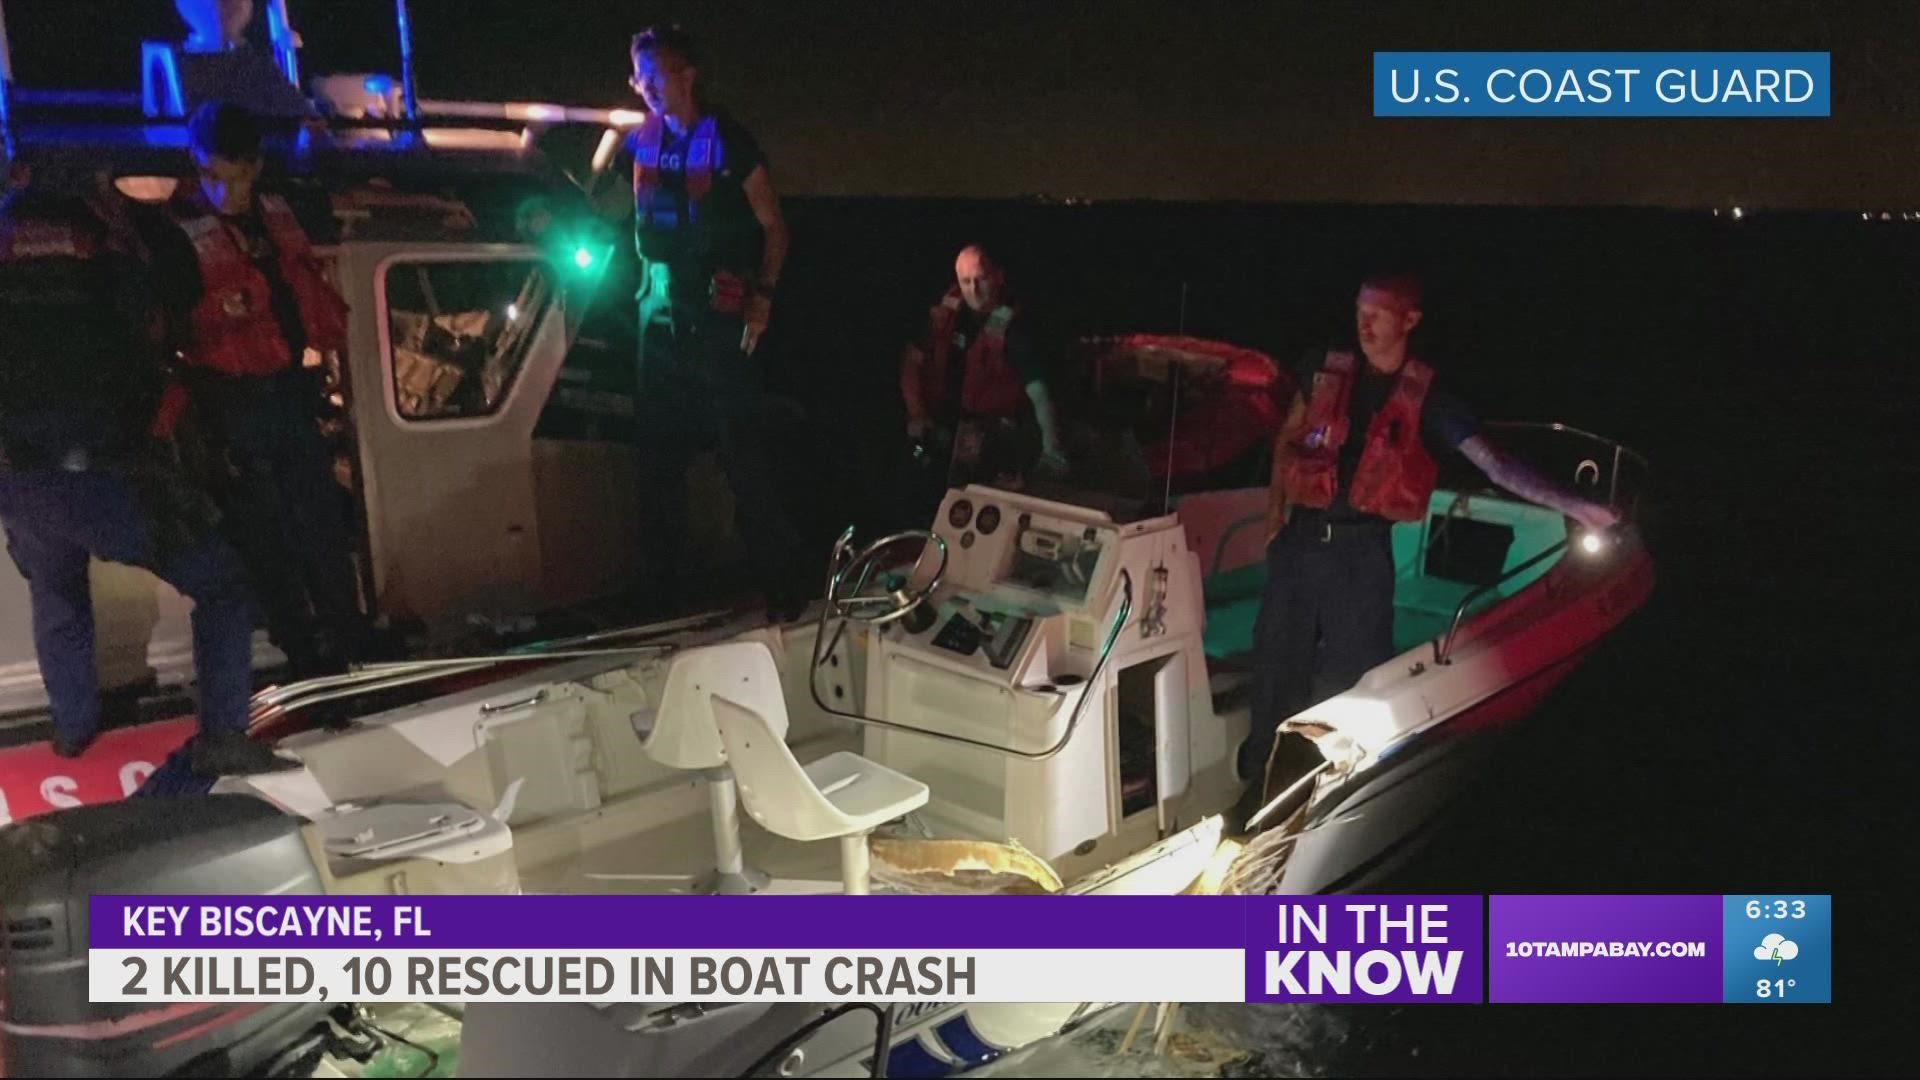 The Coast Guard said a person involved in the collision notified the agency of the crash around 10:30 p.m. Friday night.